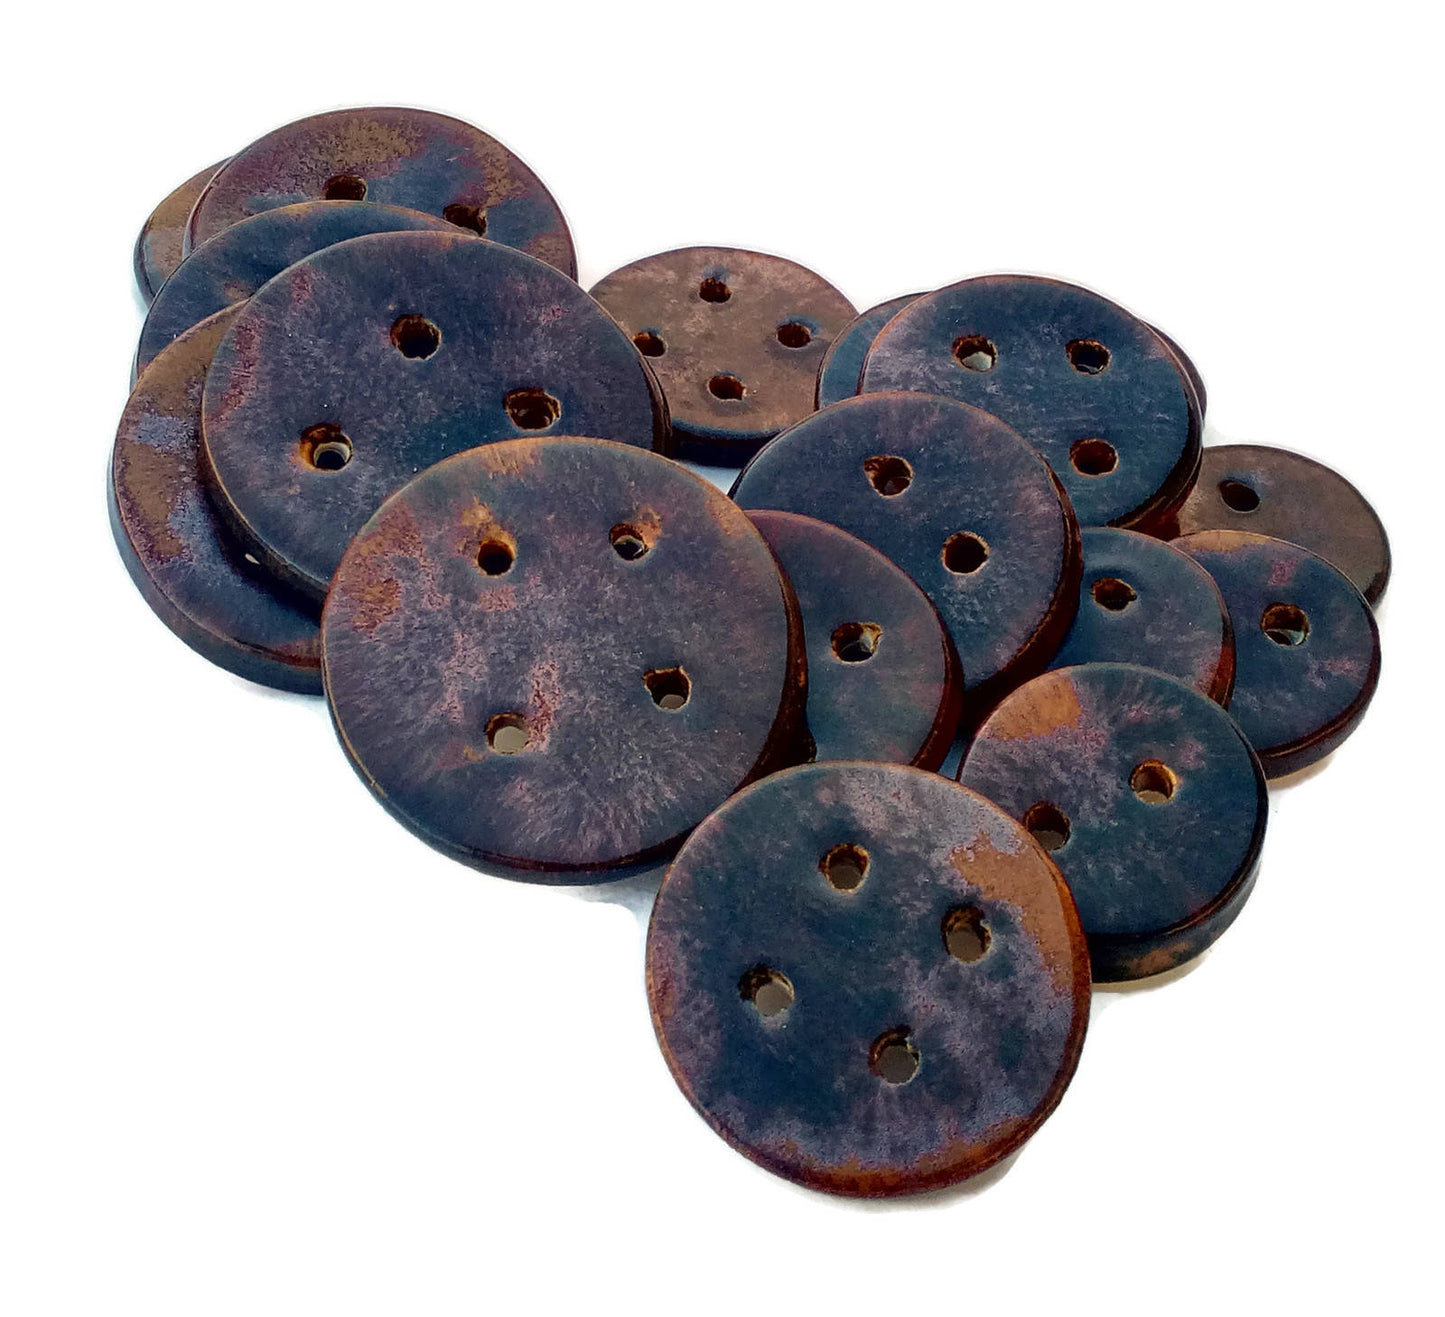 FANCY SEWING BUTTONS For Crafts With Antique Look, Extra Large Round Shaped Ceramic Buttons For Upholstery - Ceramica Ana Rafael